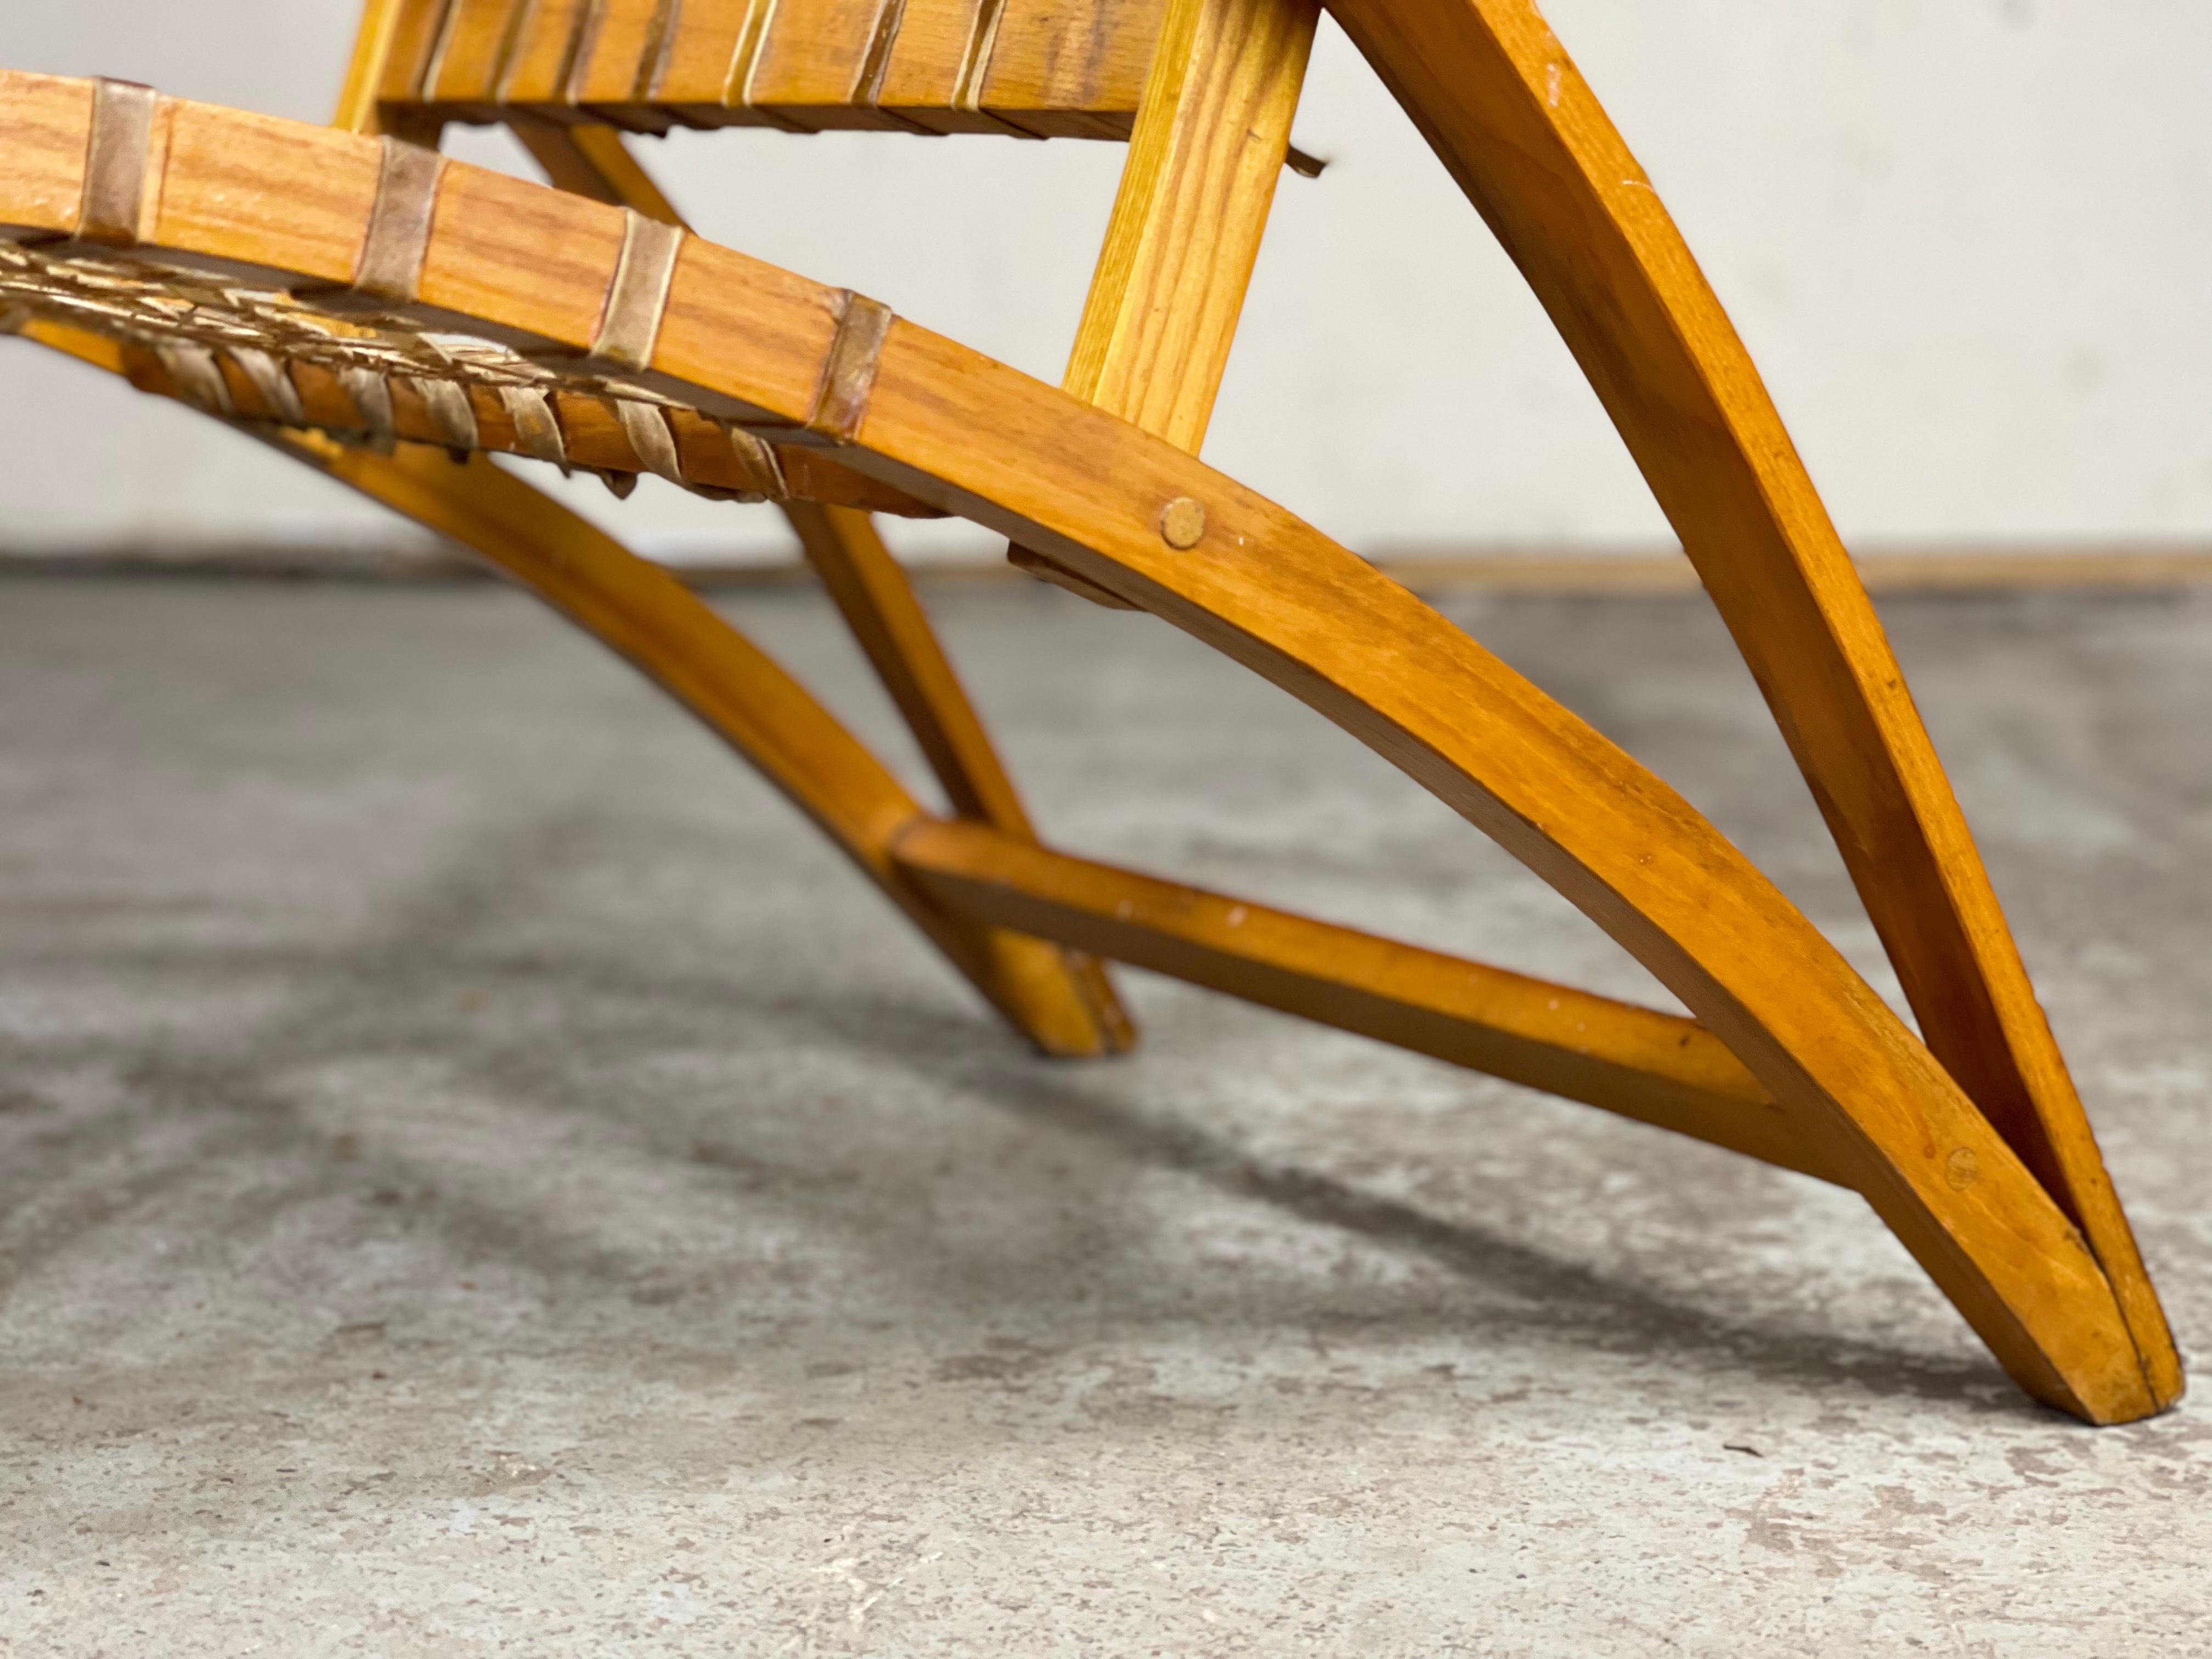 'Snow Shu' Lounge Chair by Carl Koch for Vermont Tubbs 1952 Adirondack Style 6